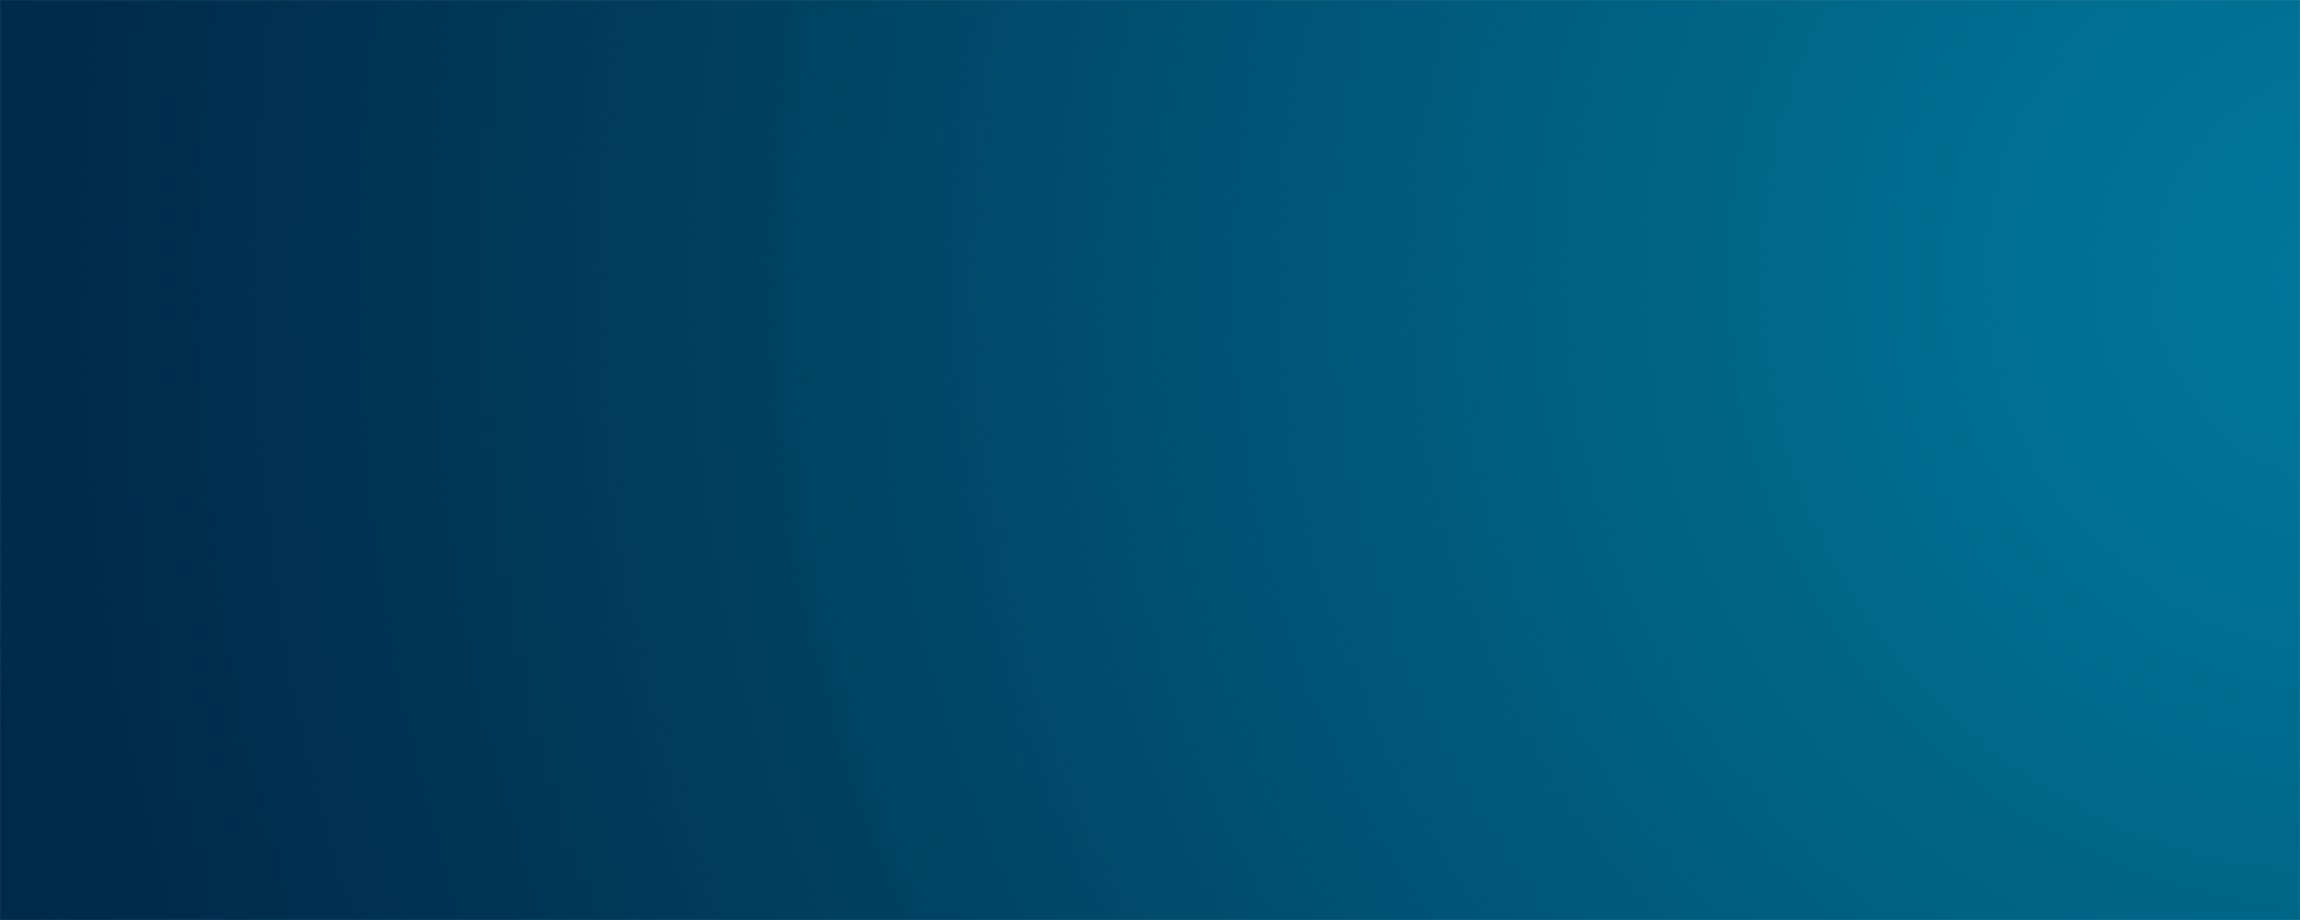 Blue and teal gradient background.